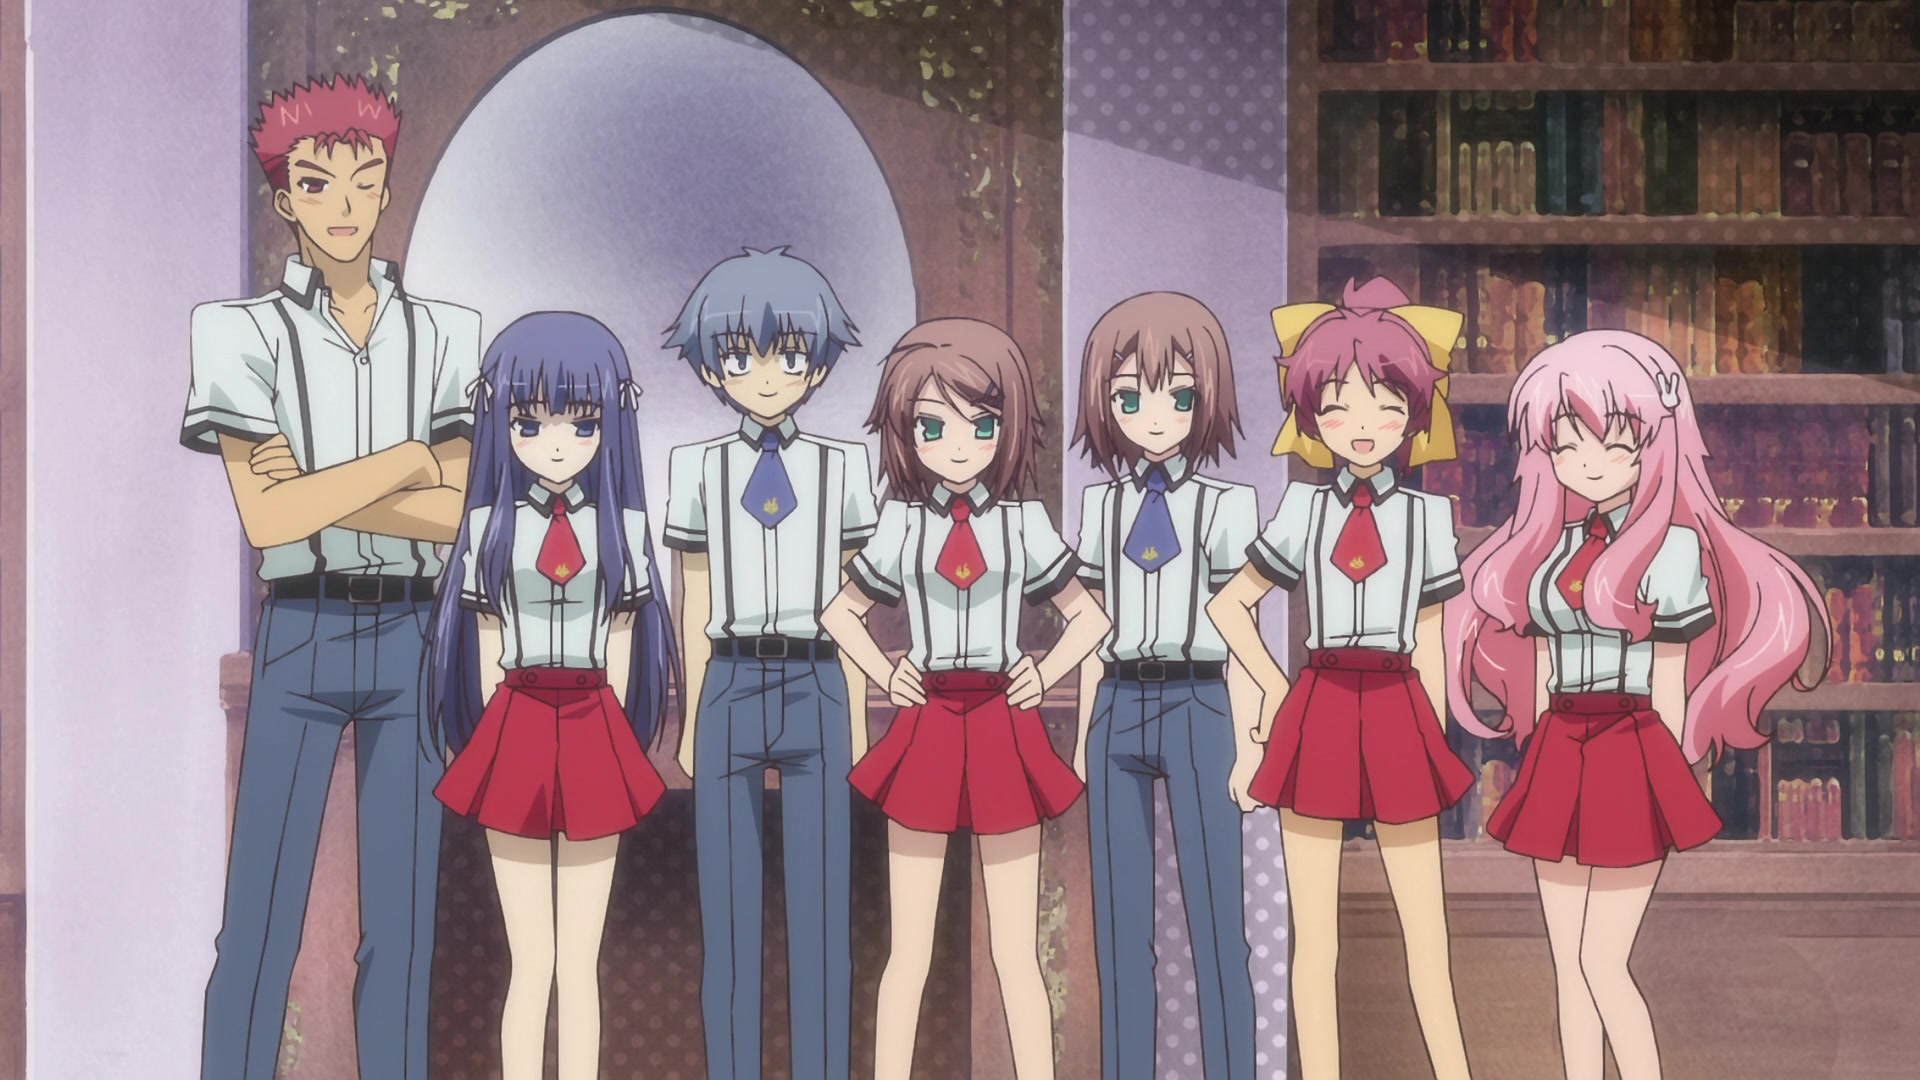 View Fullsized Uncompressed Image From Baka and Test: Summon the Beasts.